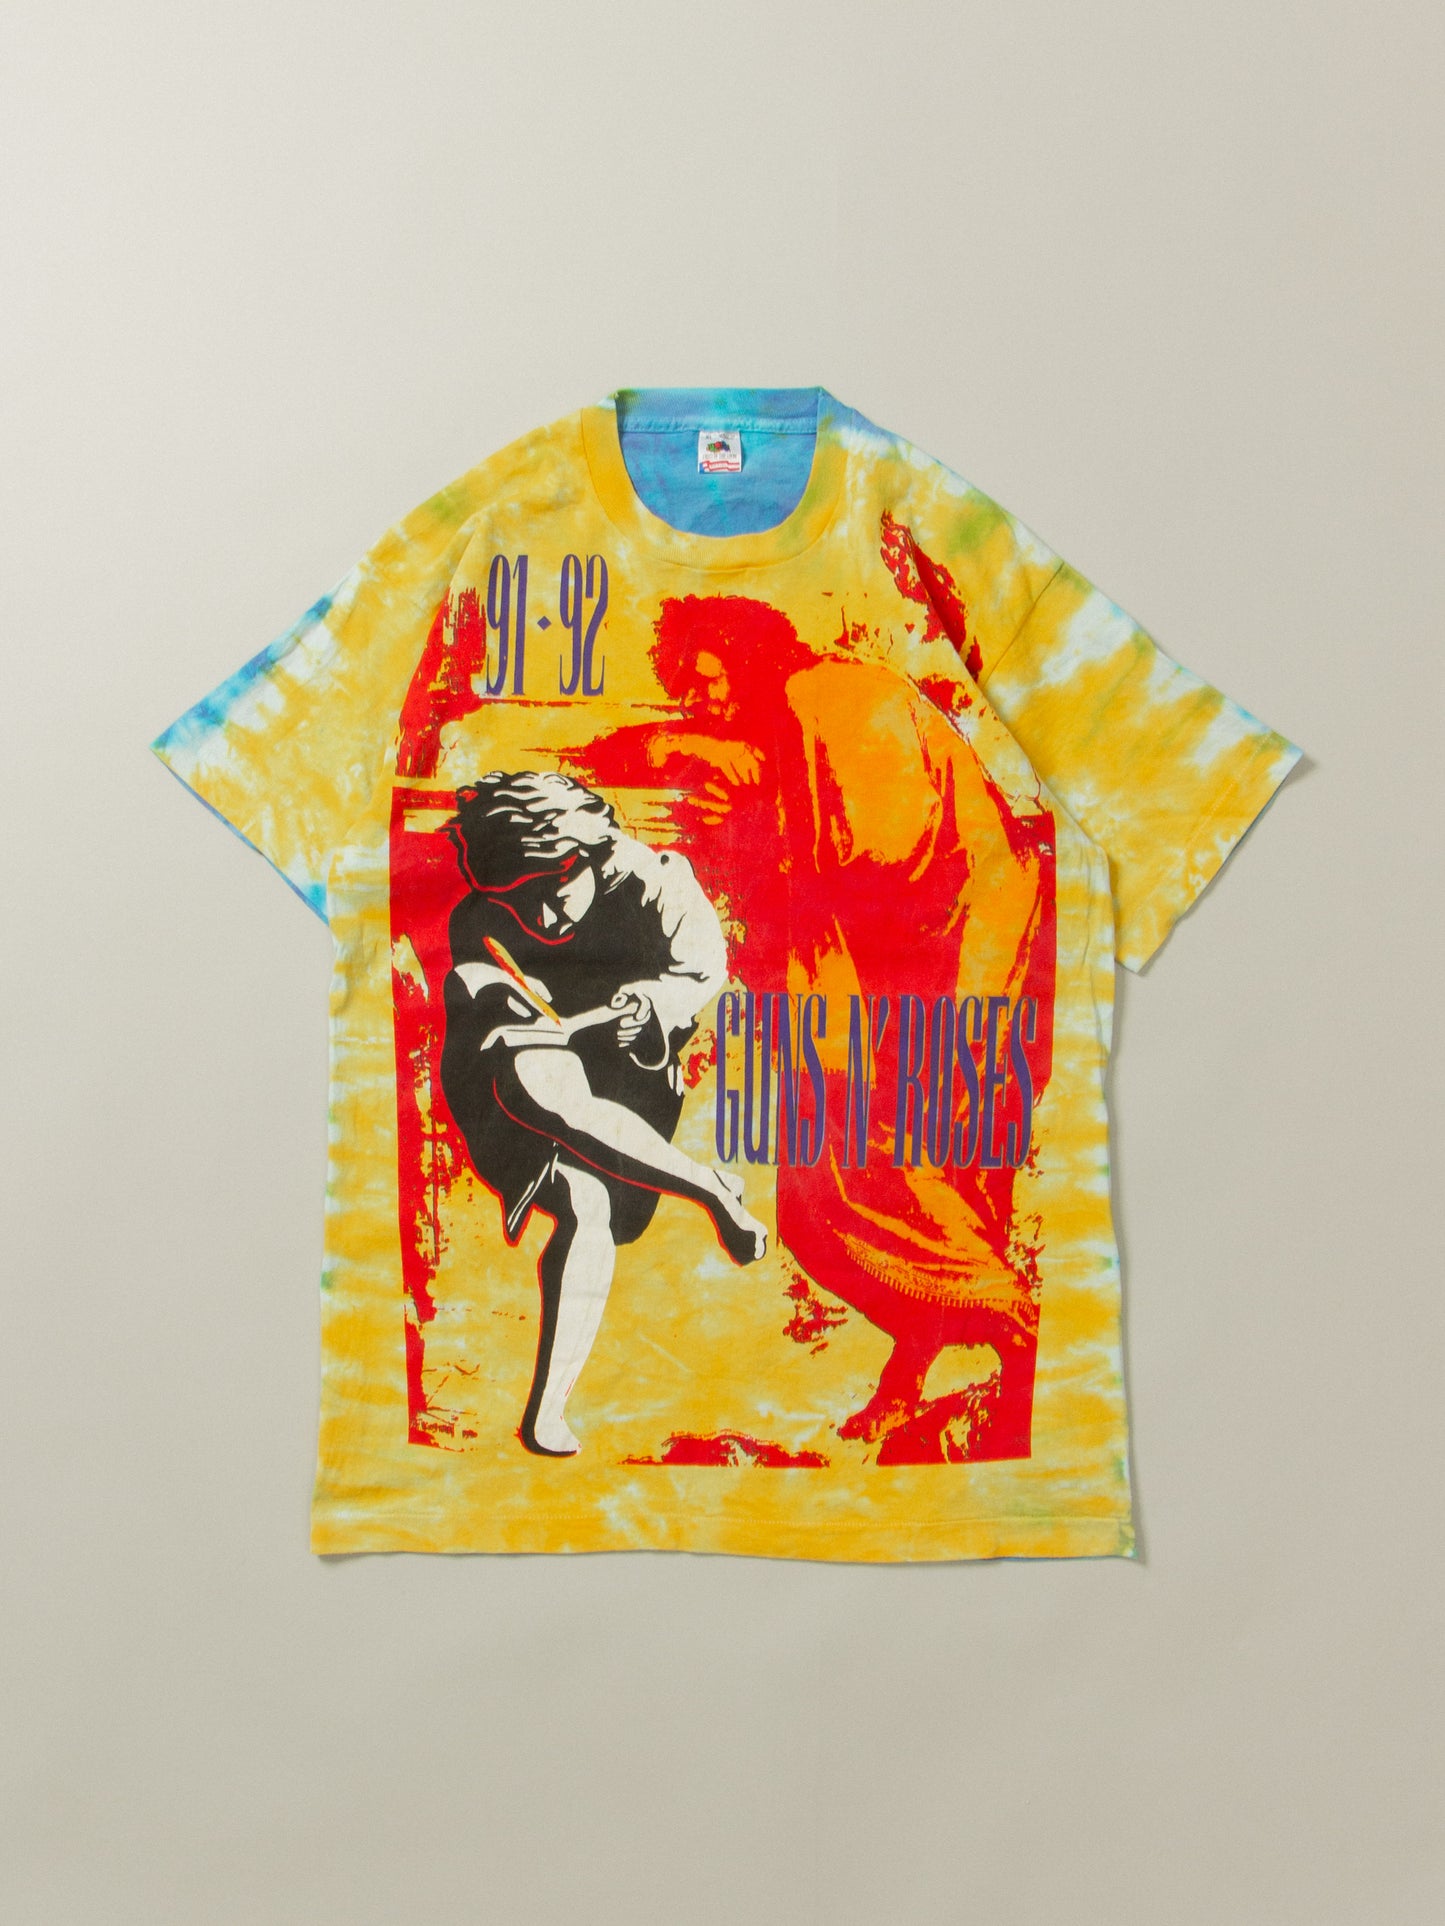 Vintage All Over Print Single-Stitched Guns N' Roses Tie Dye Tee. Fruit of The Loom tag. 